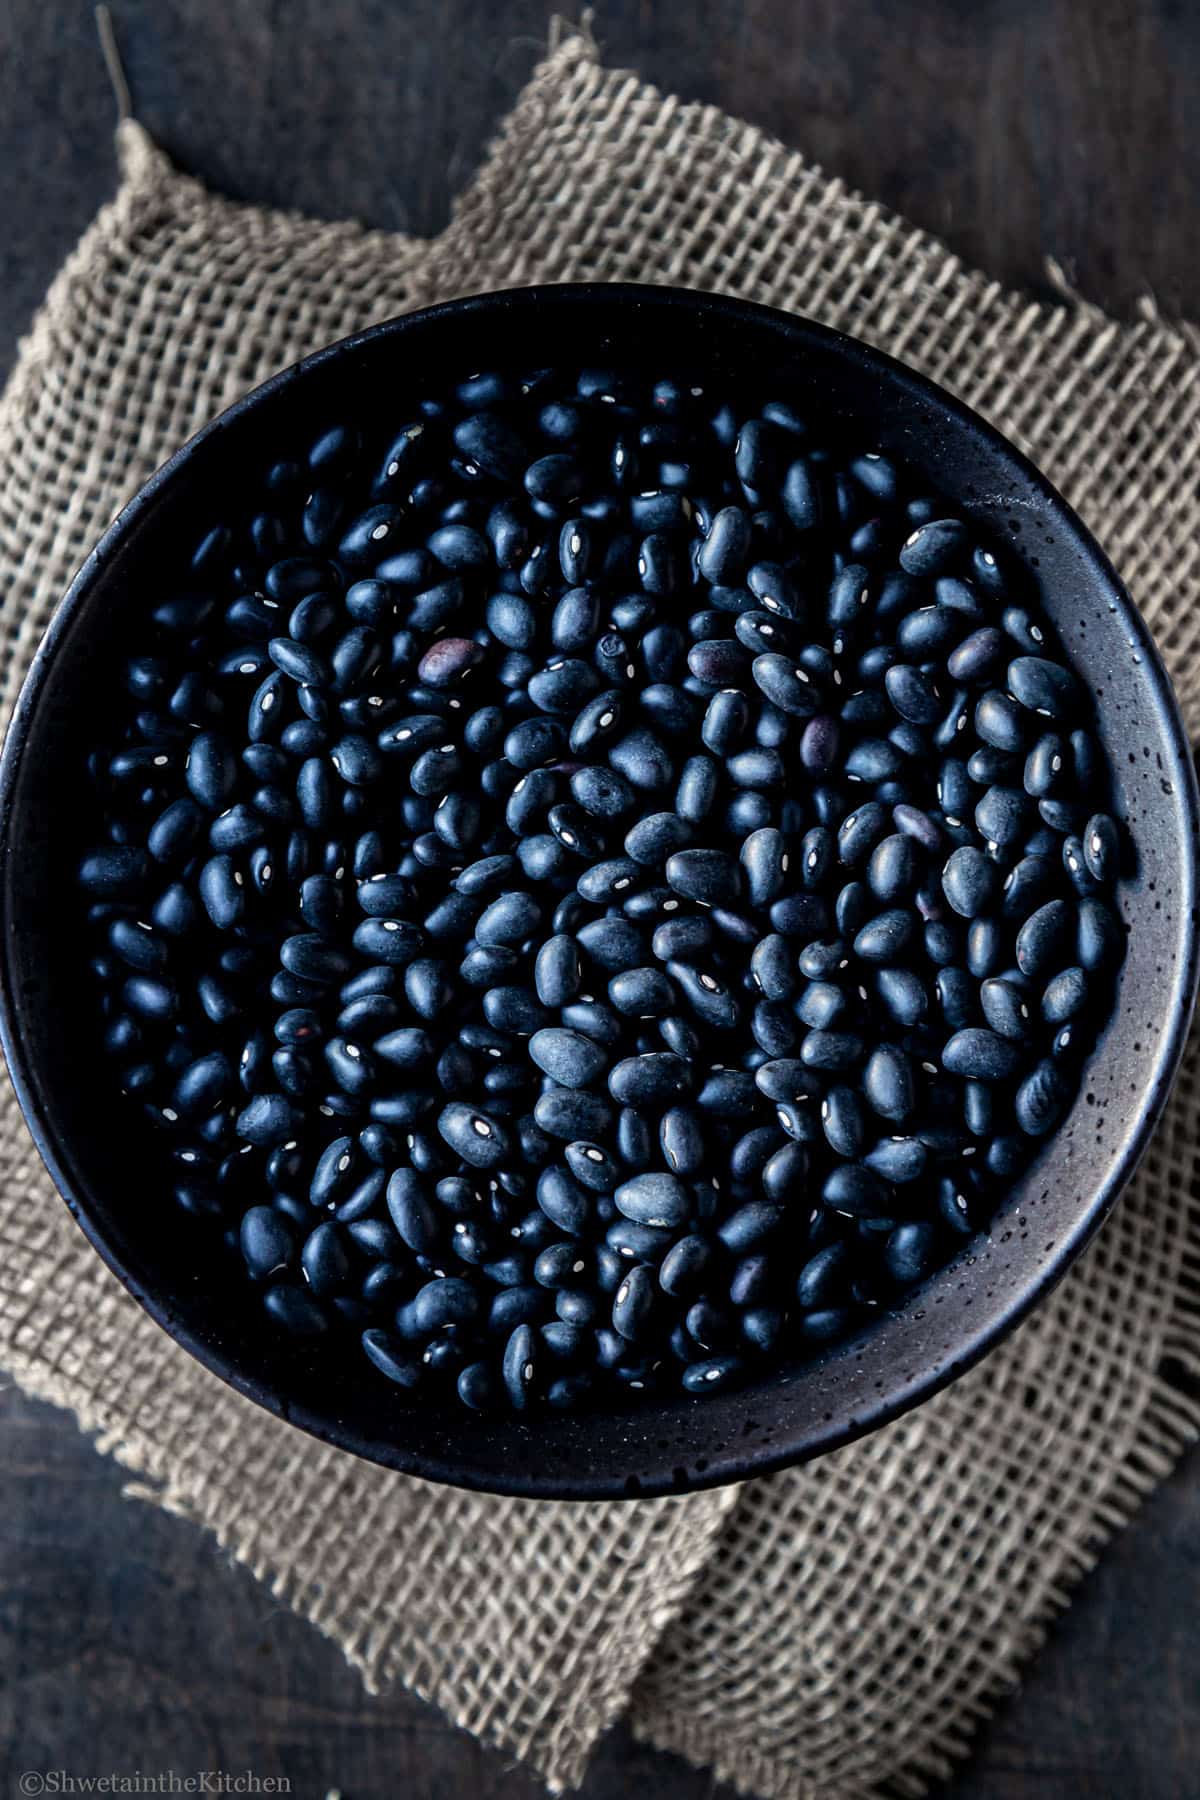 Top view of dried black beans in a black bowl